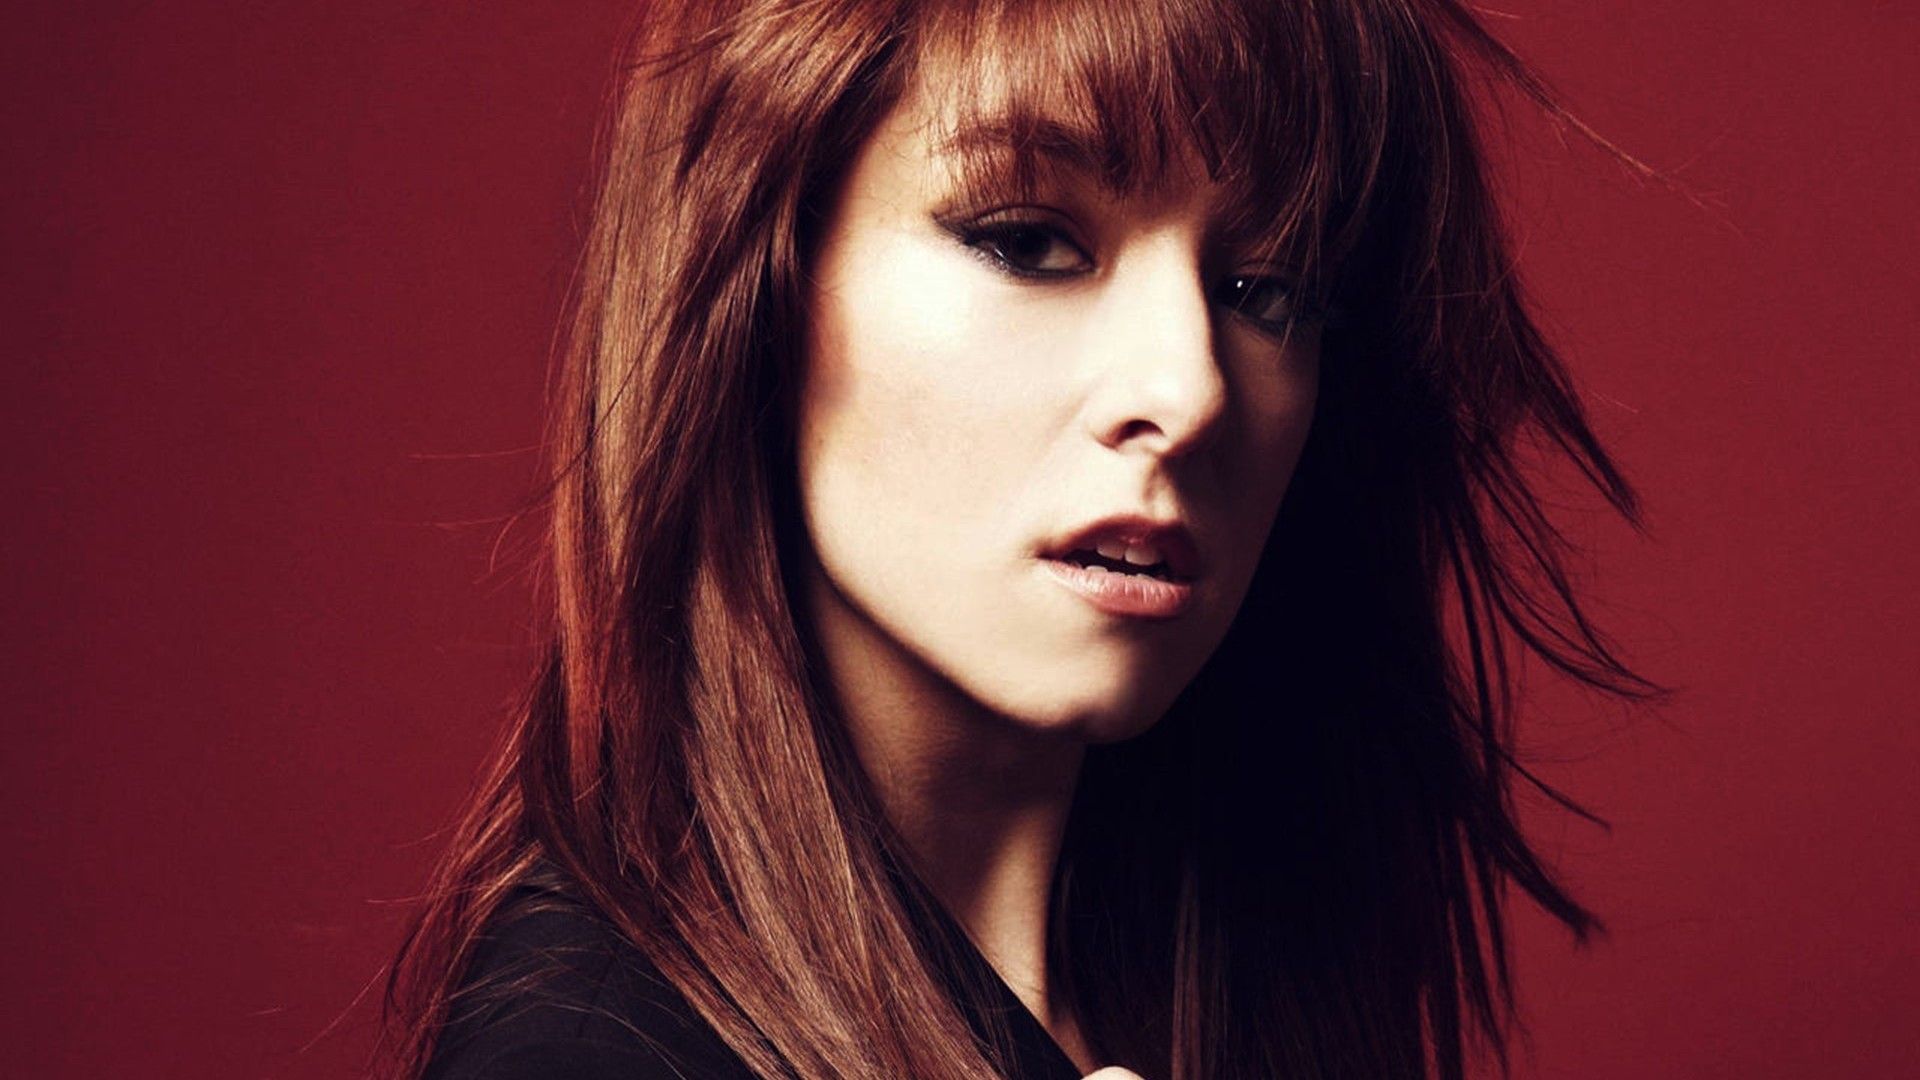 Female Model Christina Grimmie wallpapers and images - wallpapers